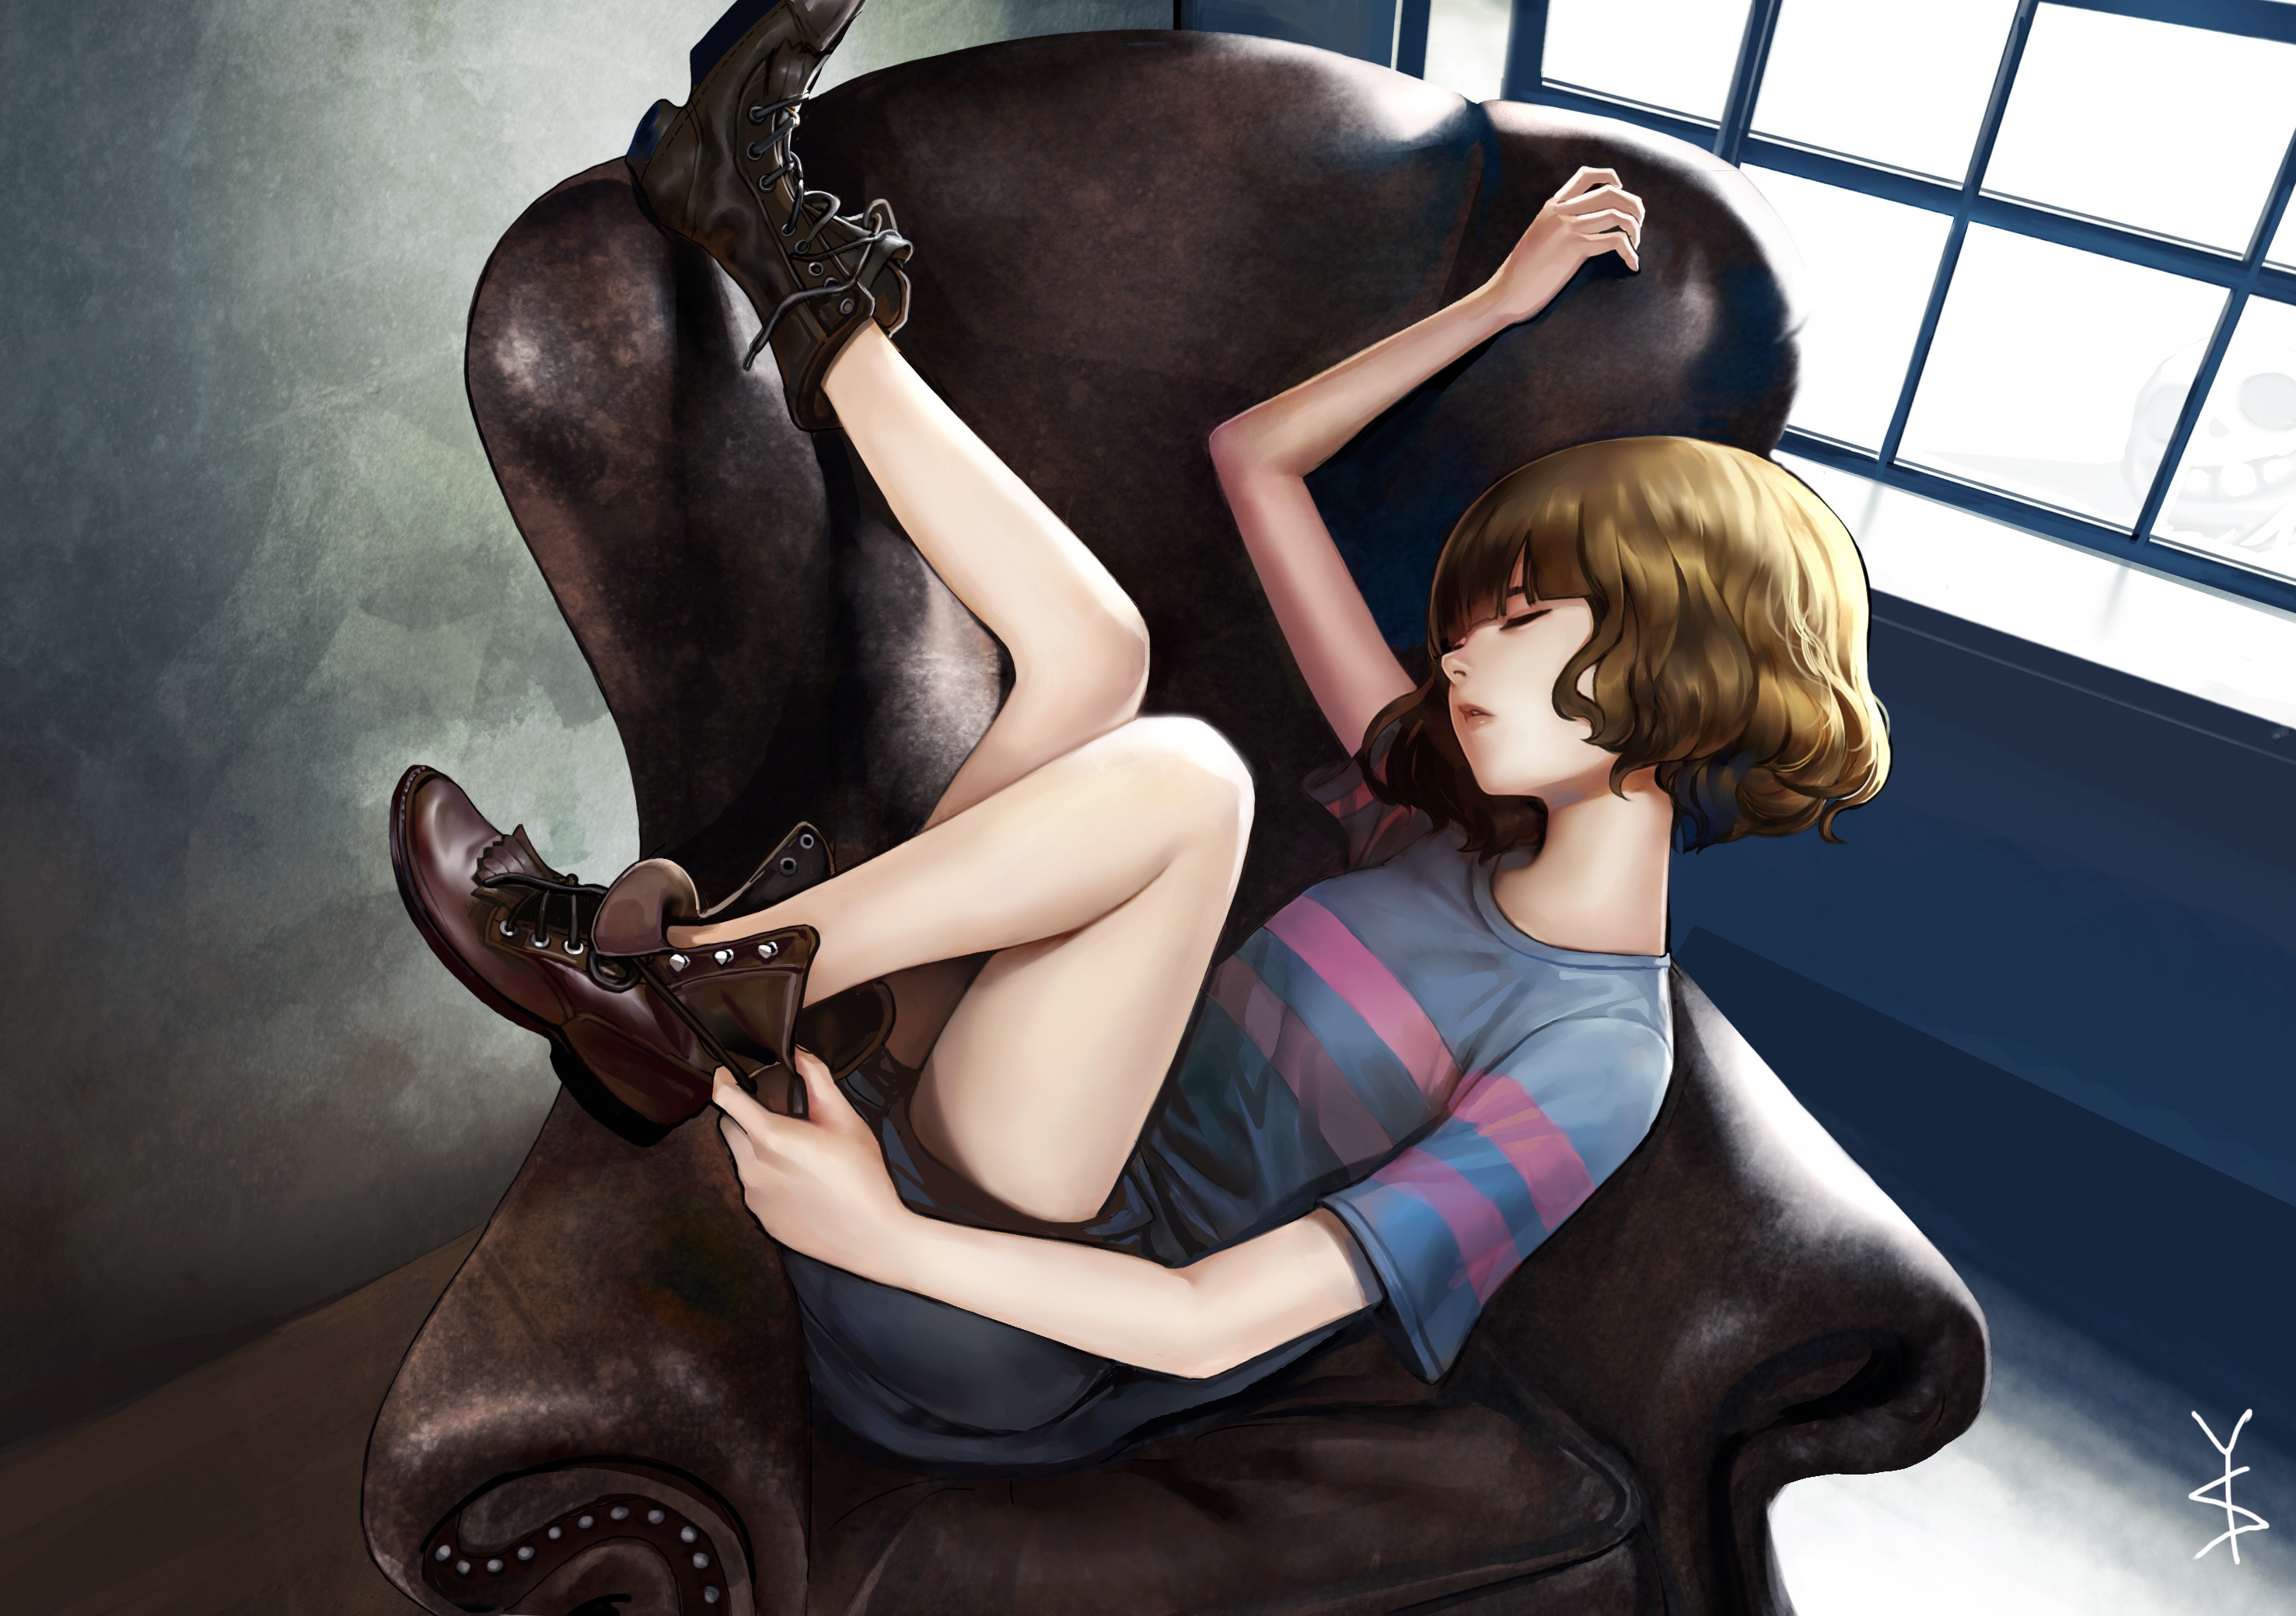 Anime 2953x2079 anime anime girls Undertale Frisk boots shirt shorts laced boots shoulder length hair thighs legs closed eyes Pixiv women indoors